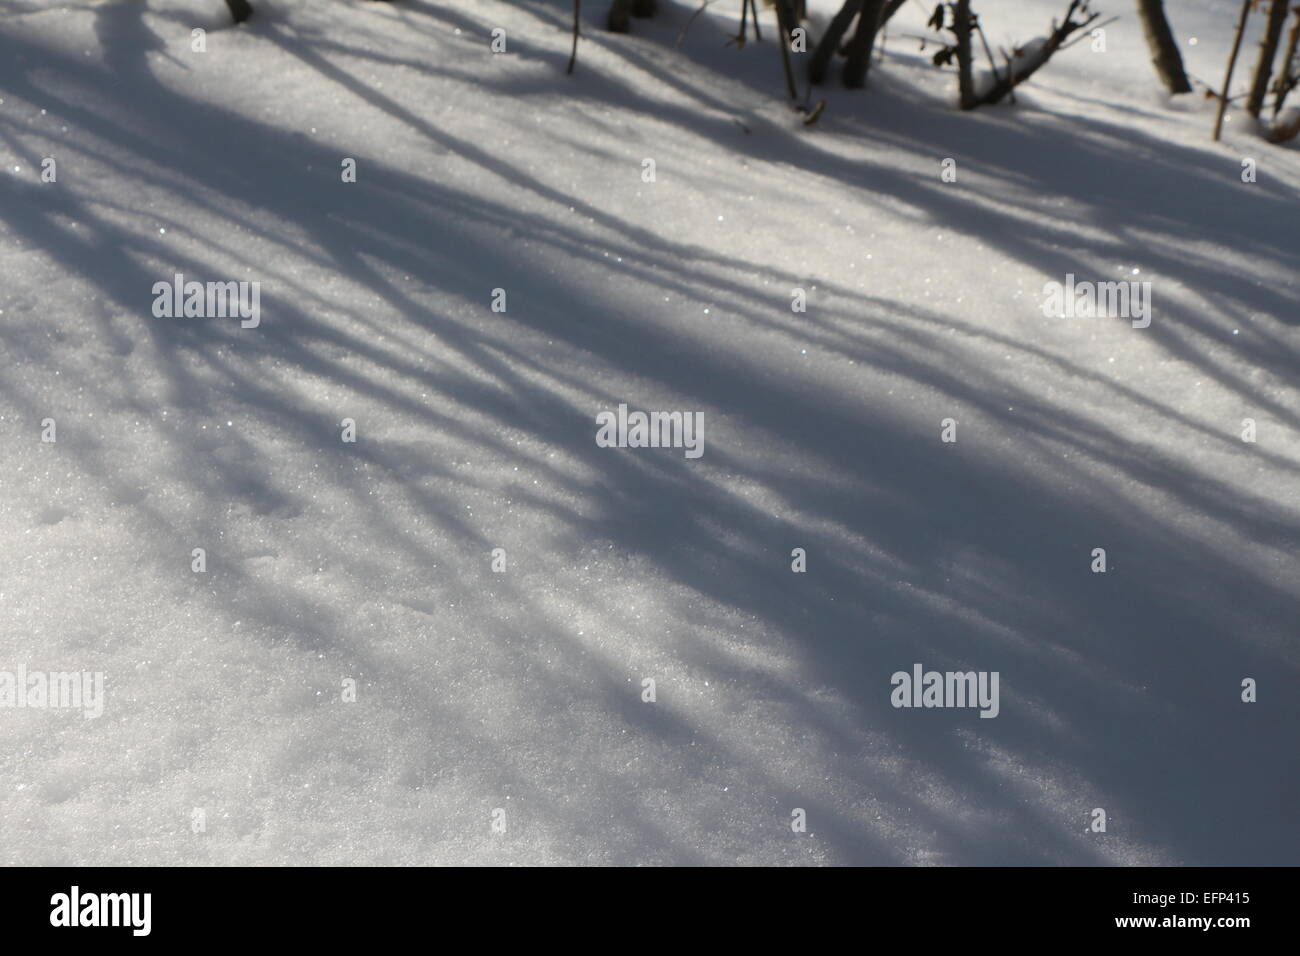 A SHADOW OF LIGHT CASTING ON THE SNOW.SHADOWS IN WINTER SNOW. Stock Photo